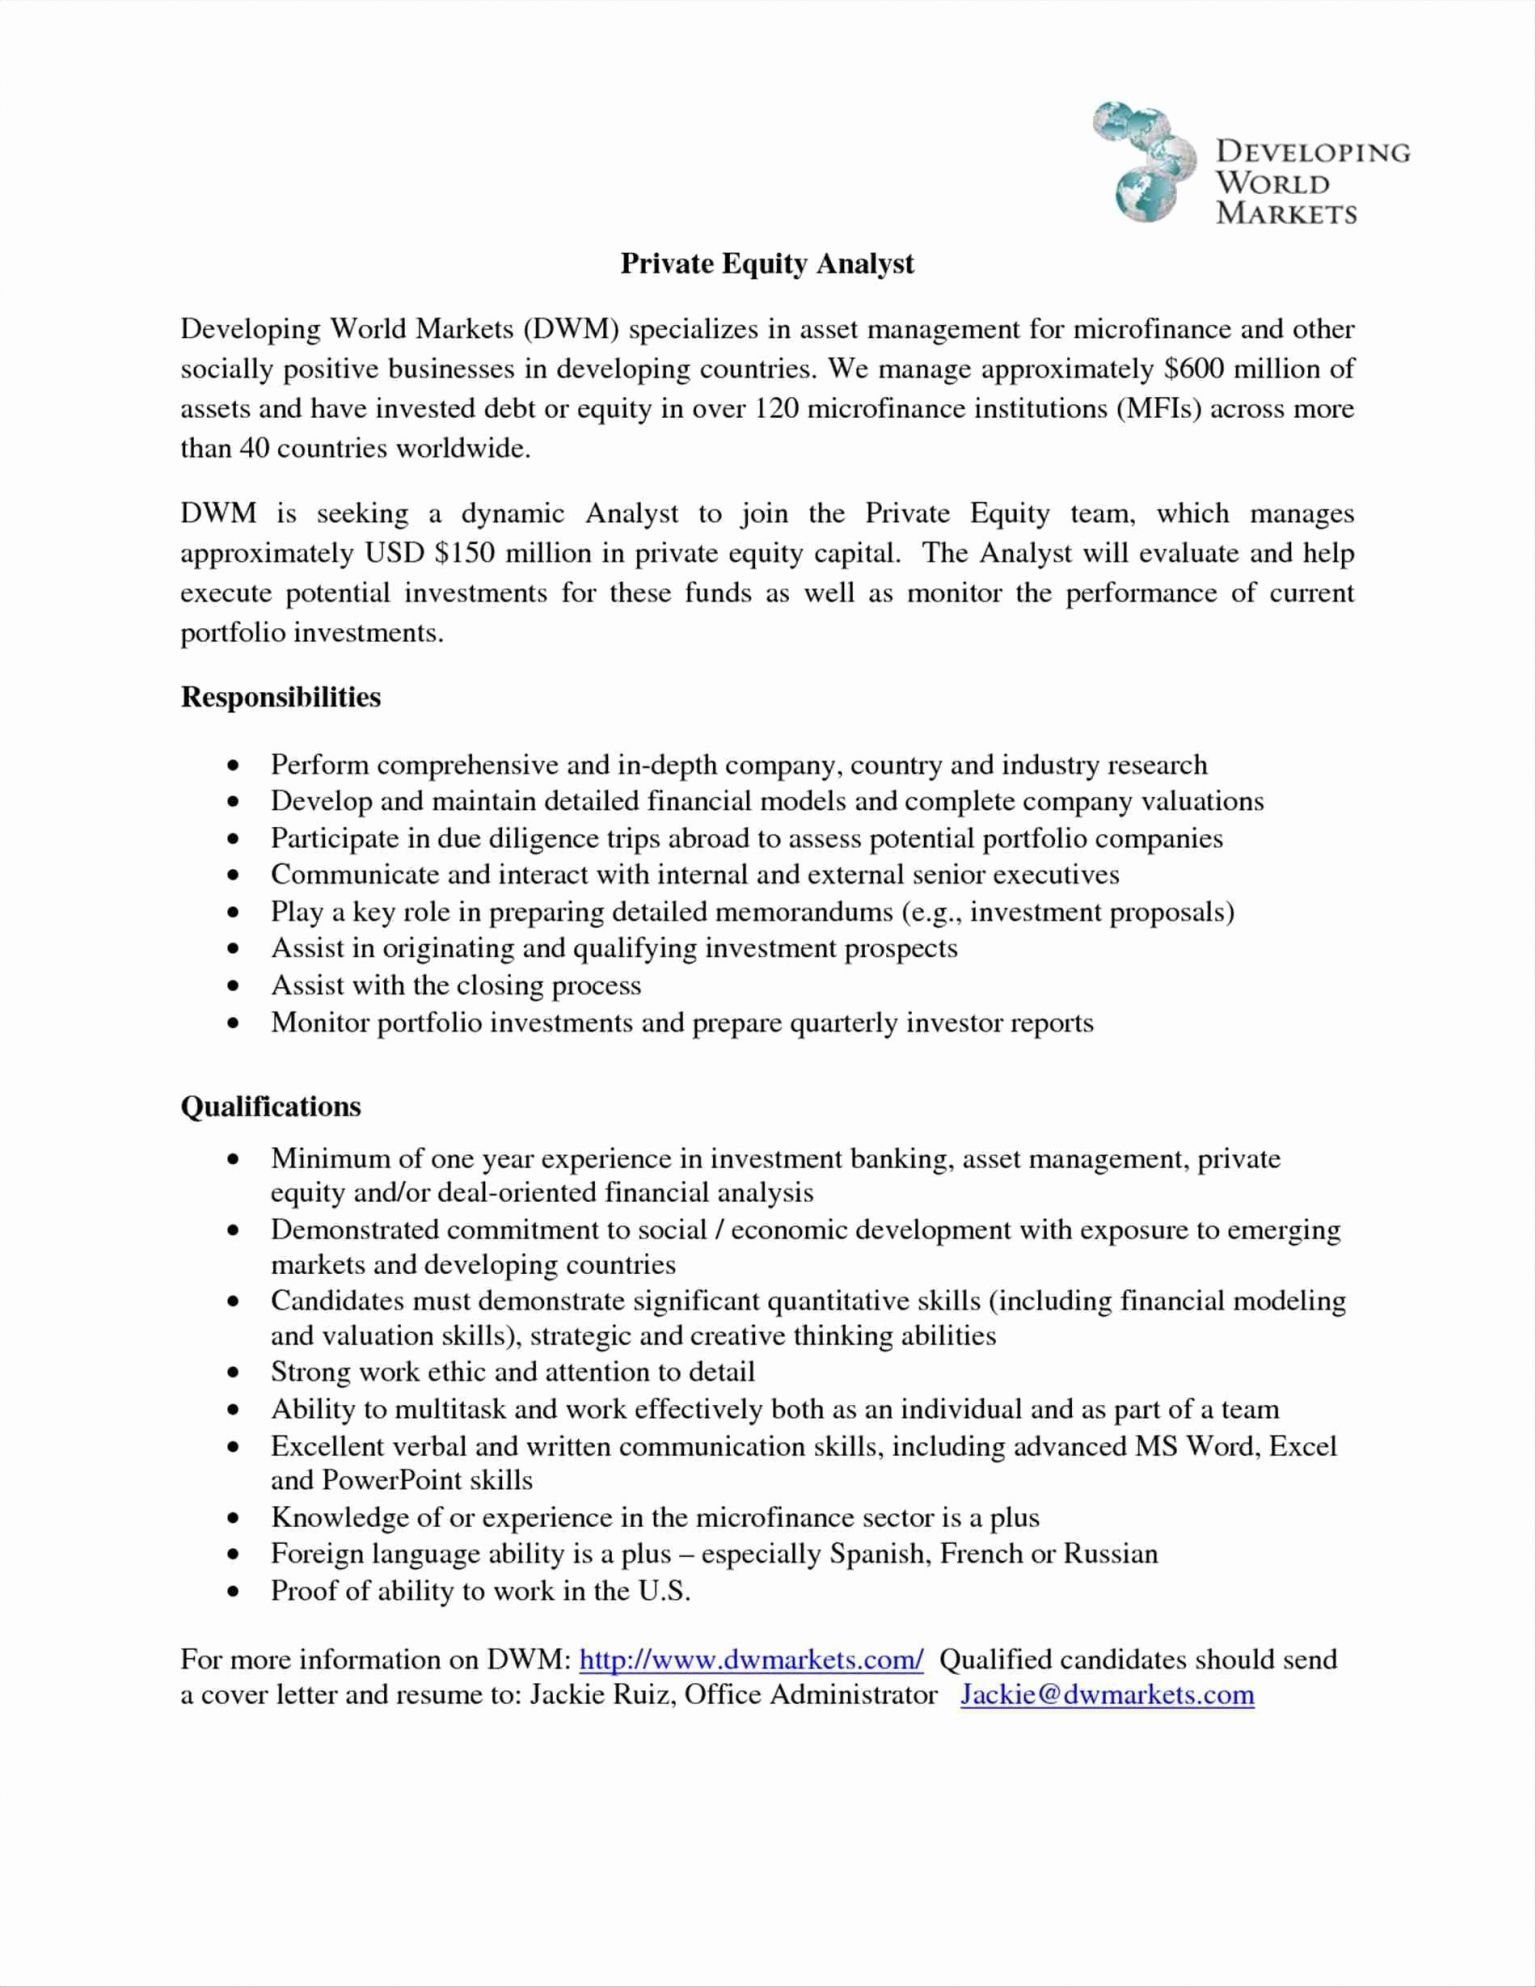 private-equity-resume-template-letter-example-template